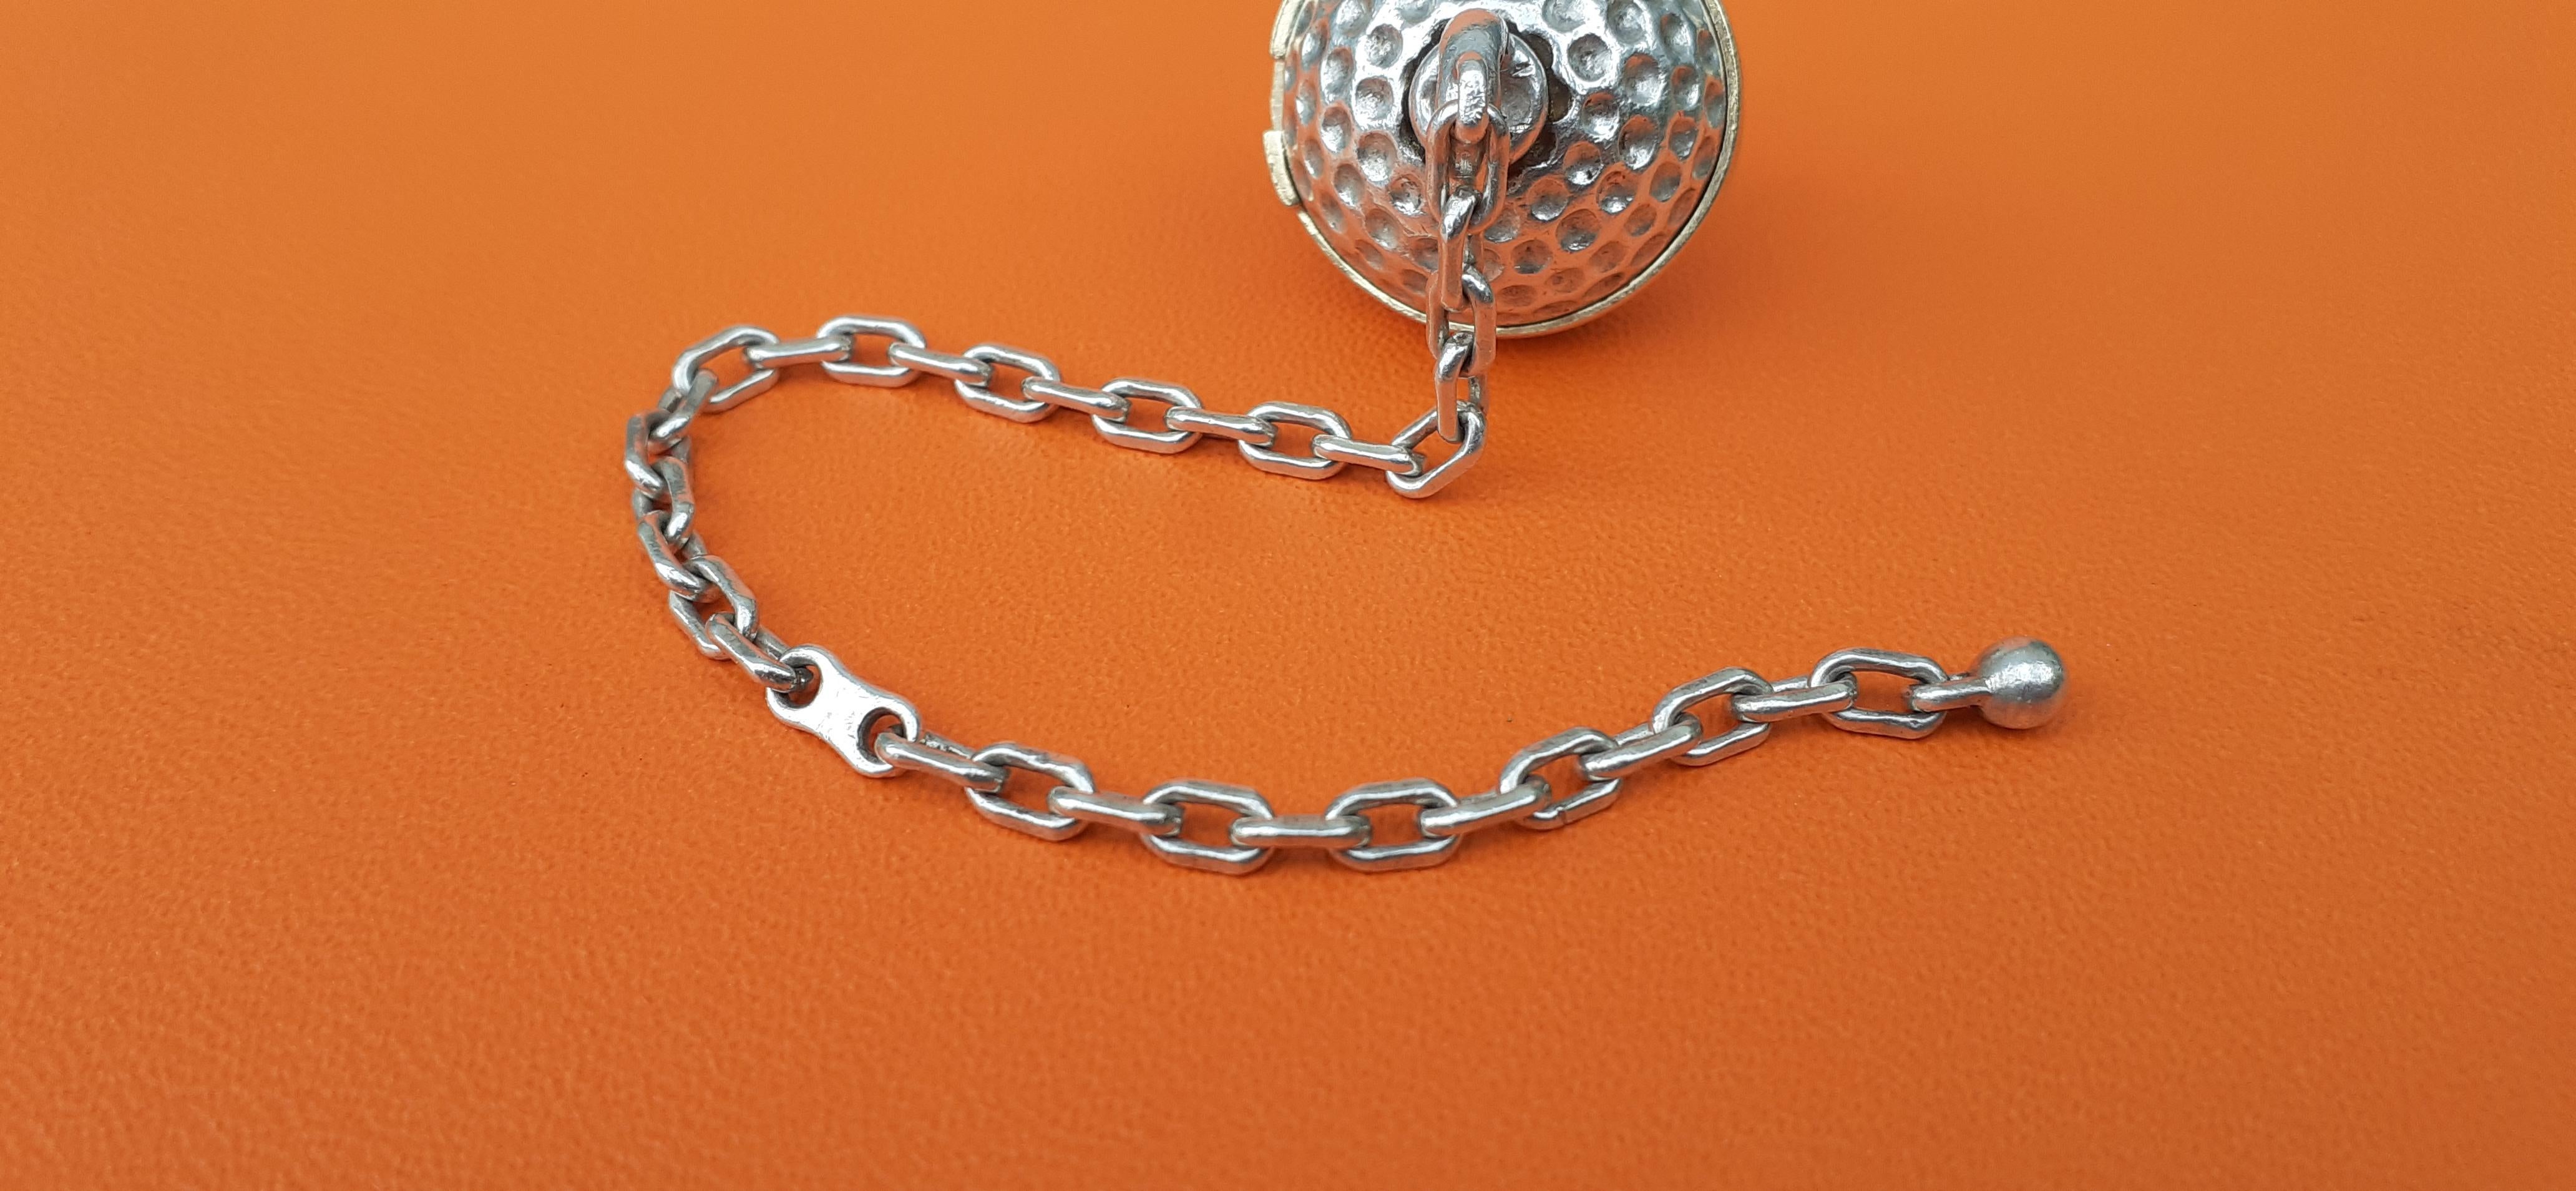 Exceptional Hermès Vintage Golf Ball Key Ring Keychain Silver and Vermeil For Sale 4